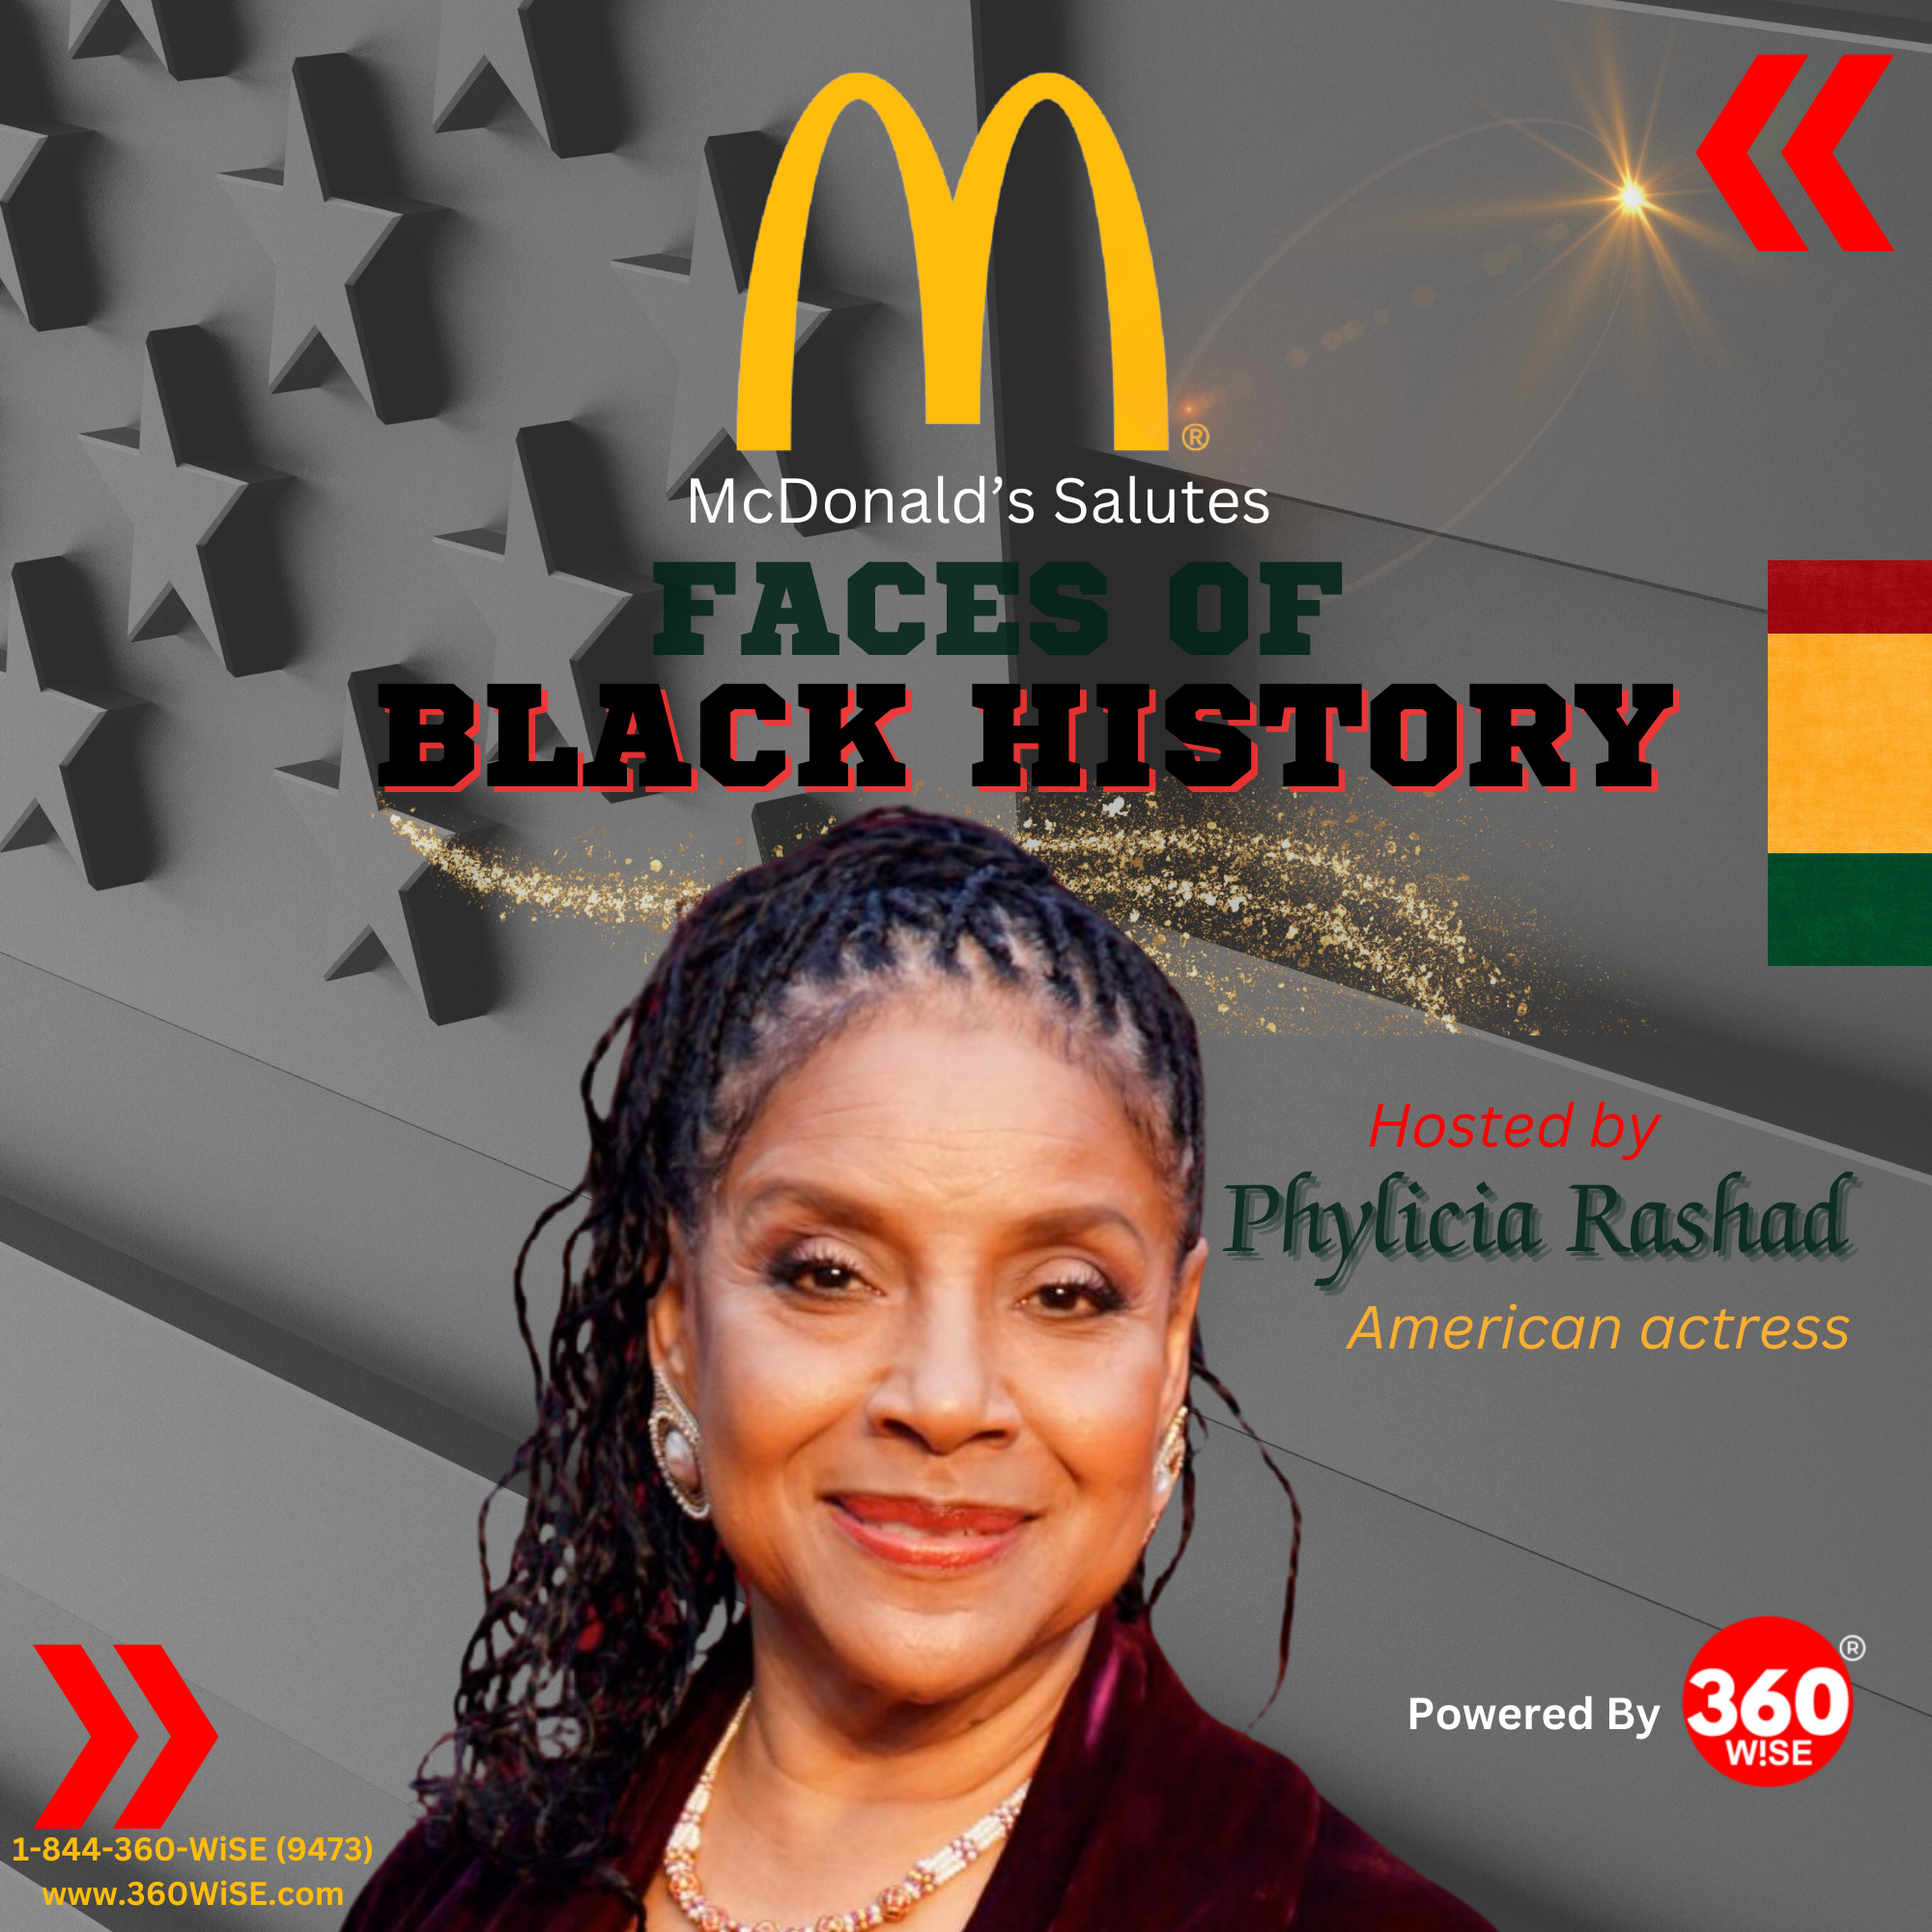 McDonald's Faces of Black History Salutes Phylicia Rashad. Powered by 360WiSE